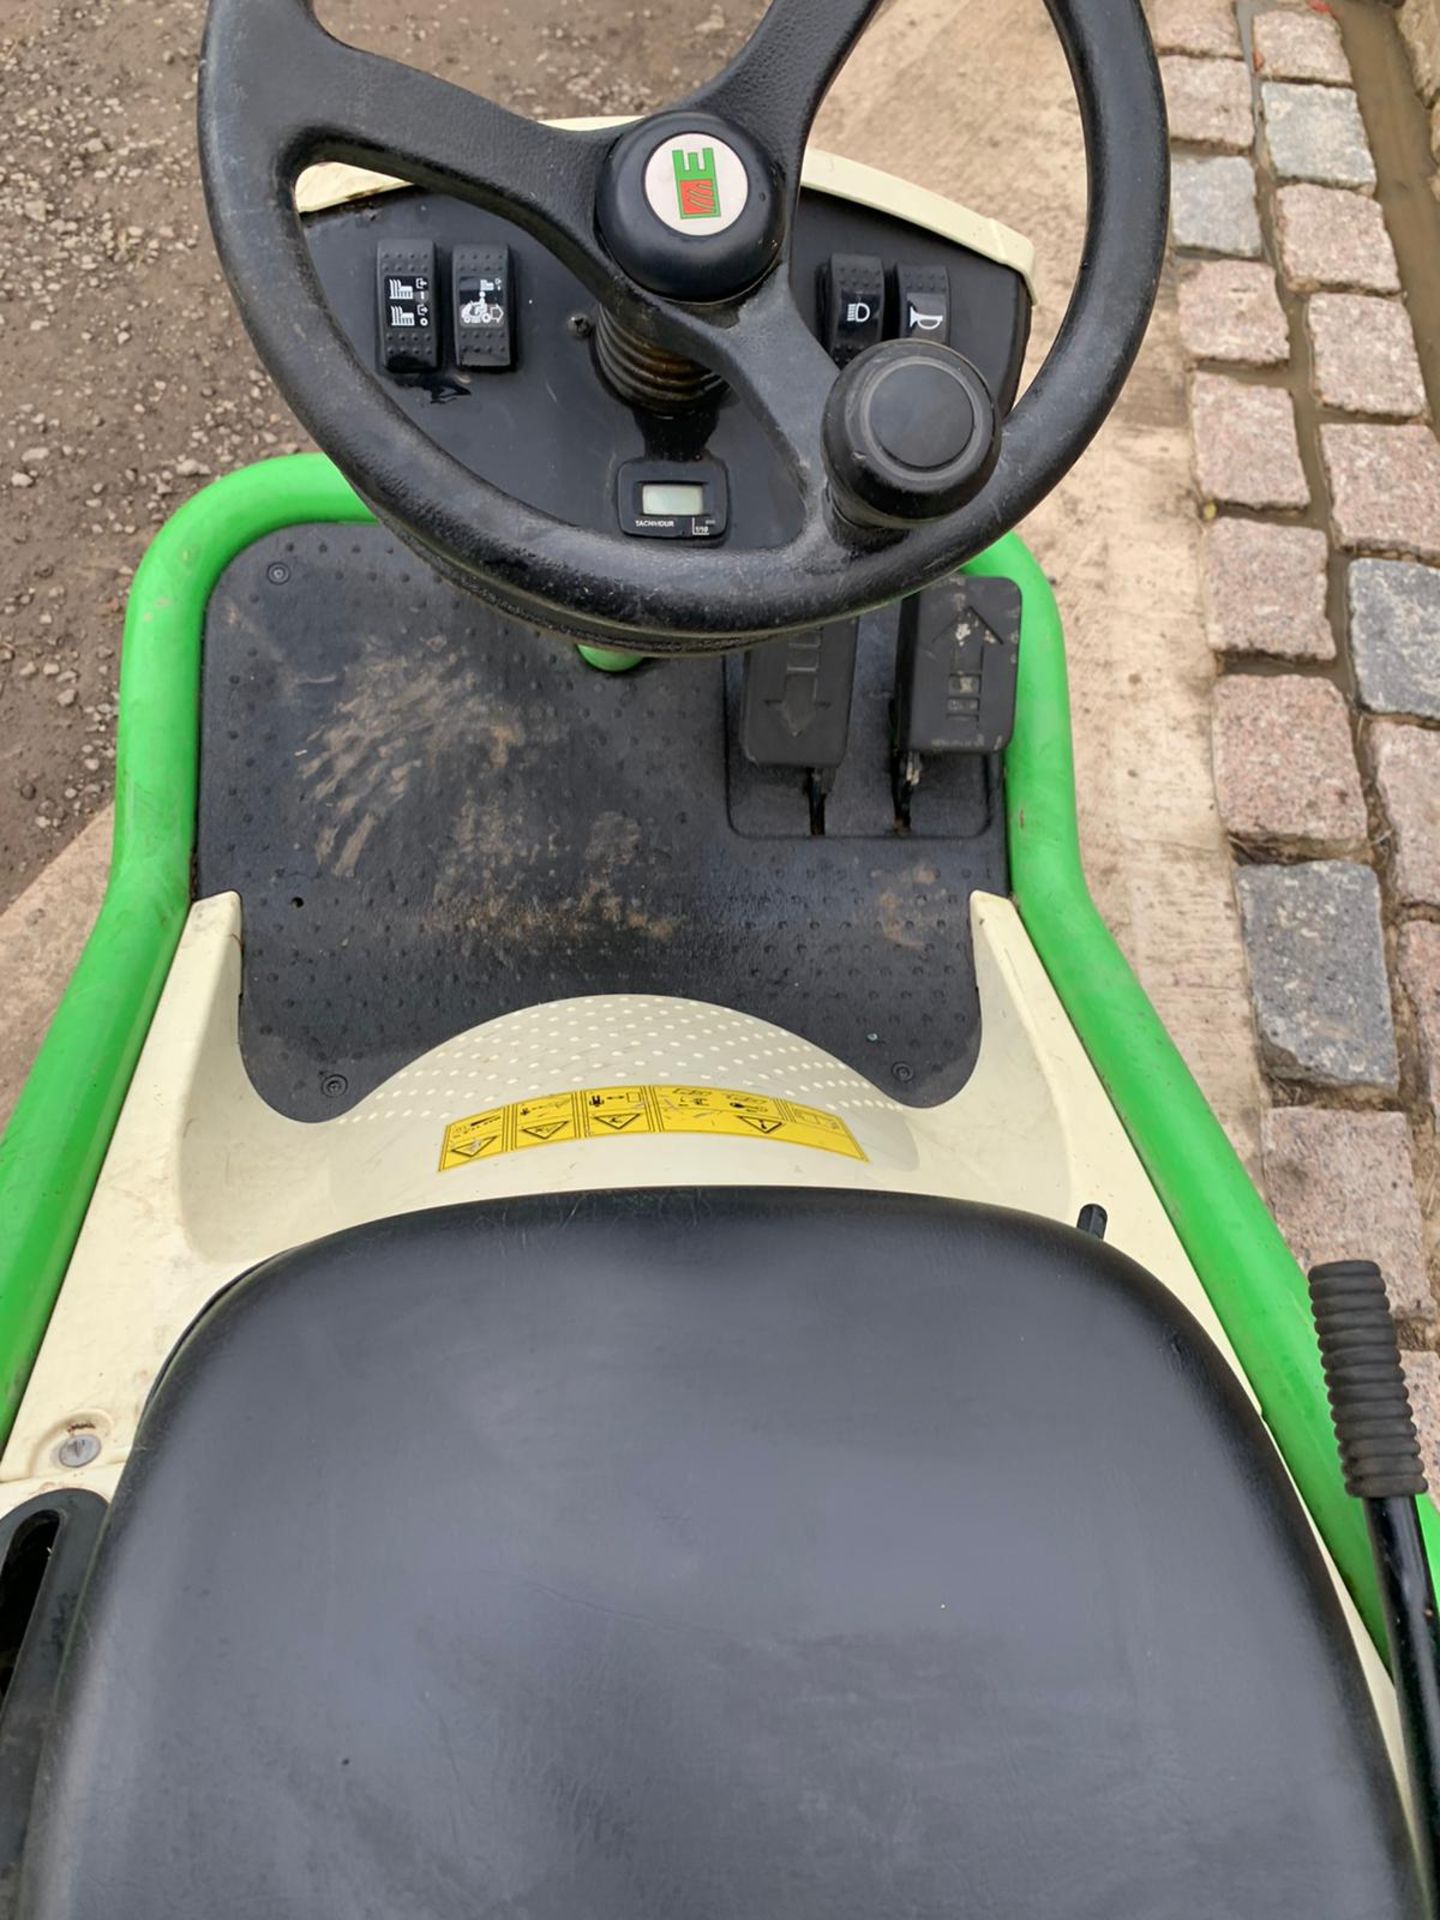 2015 ETESIA HYDRO 80 RIDE ON LAWN MOWER, RUNS, DRIVES AND CUTS *PLUS VAT* - Image 2 of 5